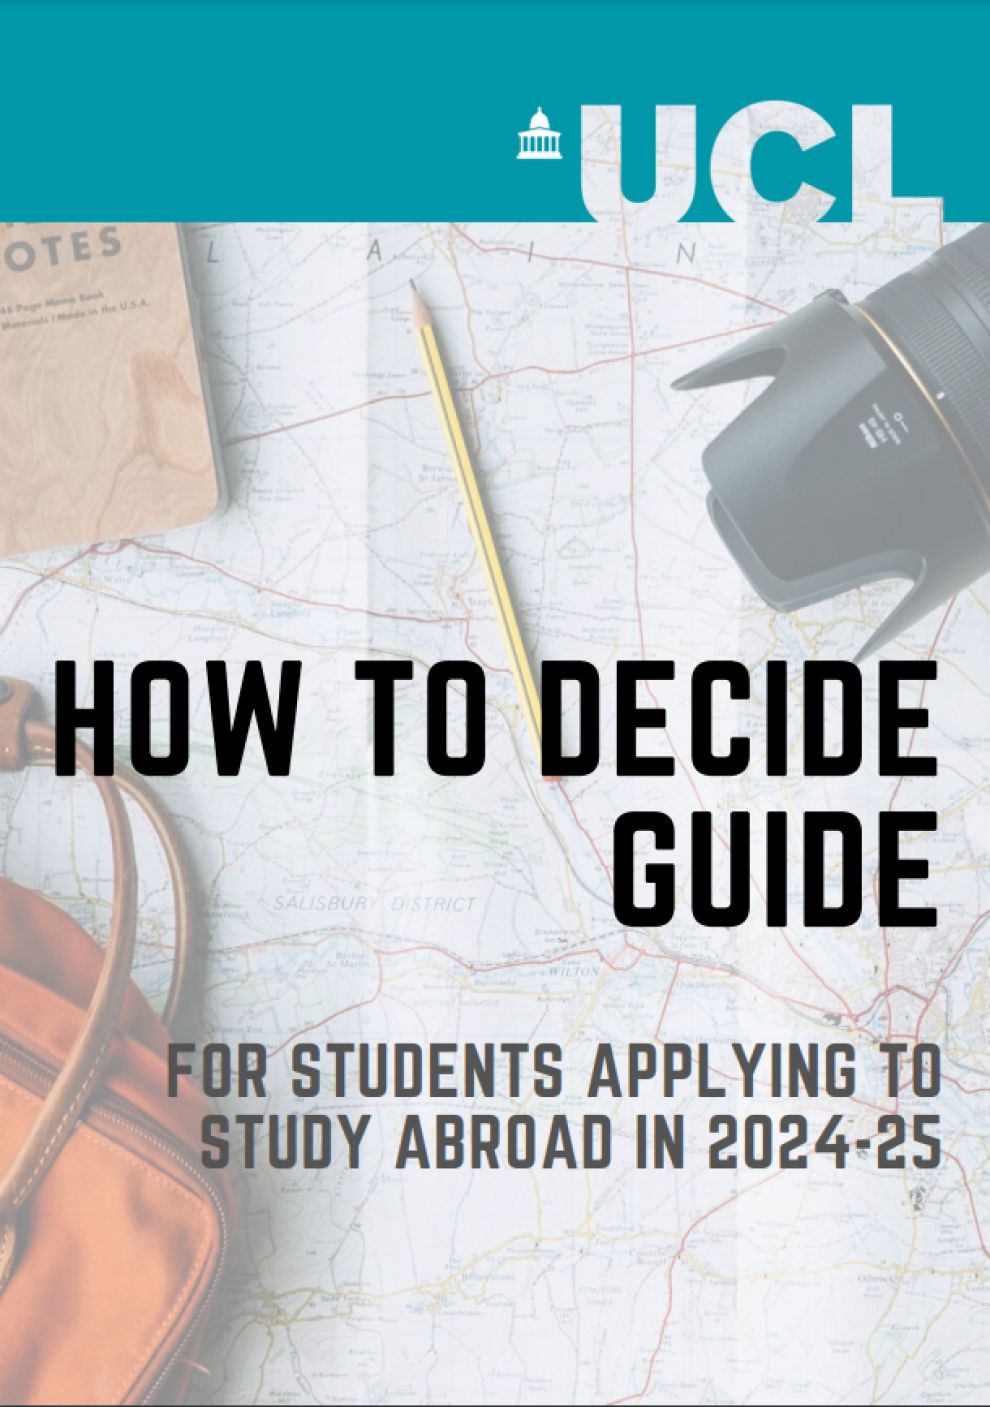 Click to read the How to Decide Guide